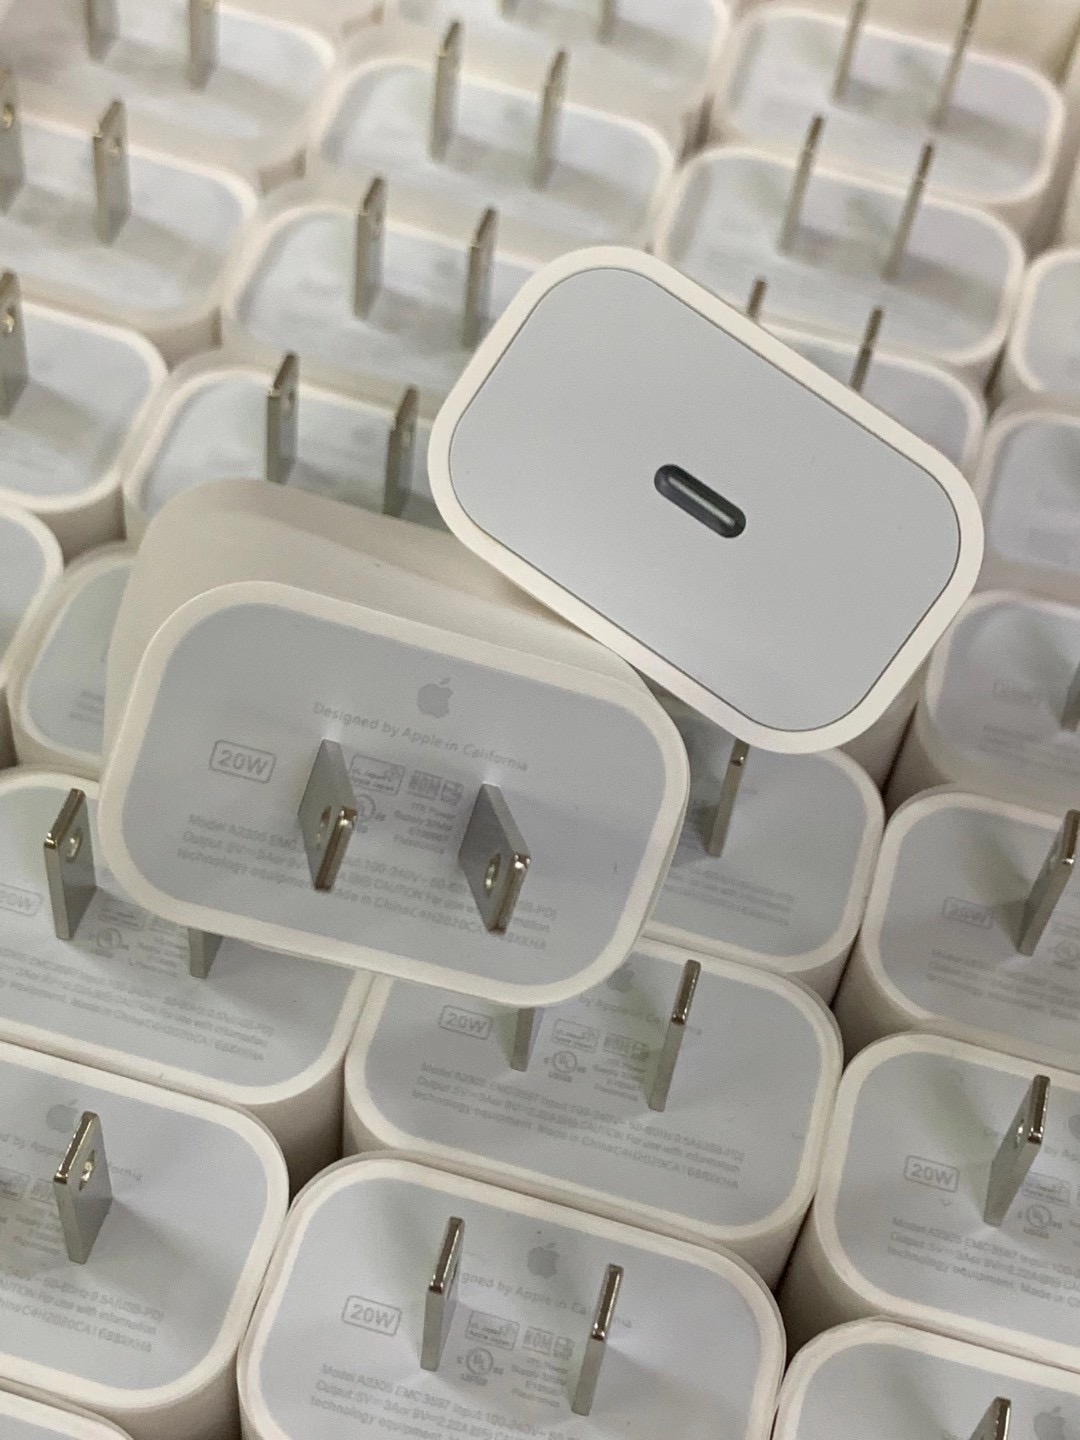 Big changes in the market for Apple IPHONE Original Accessories